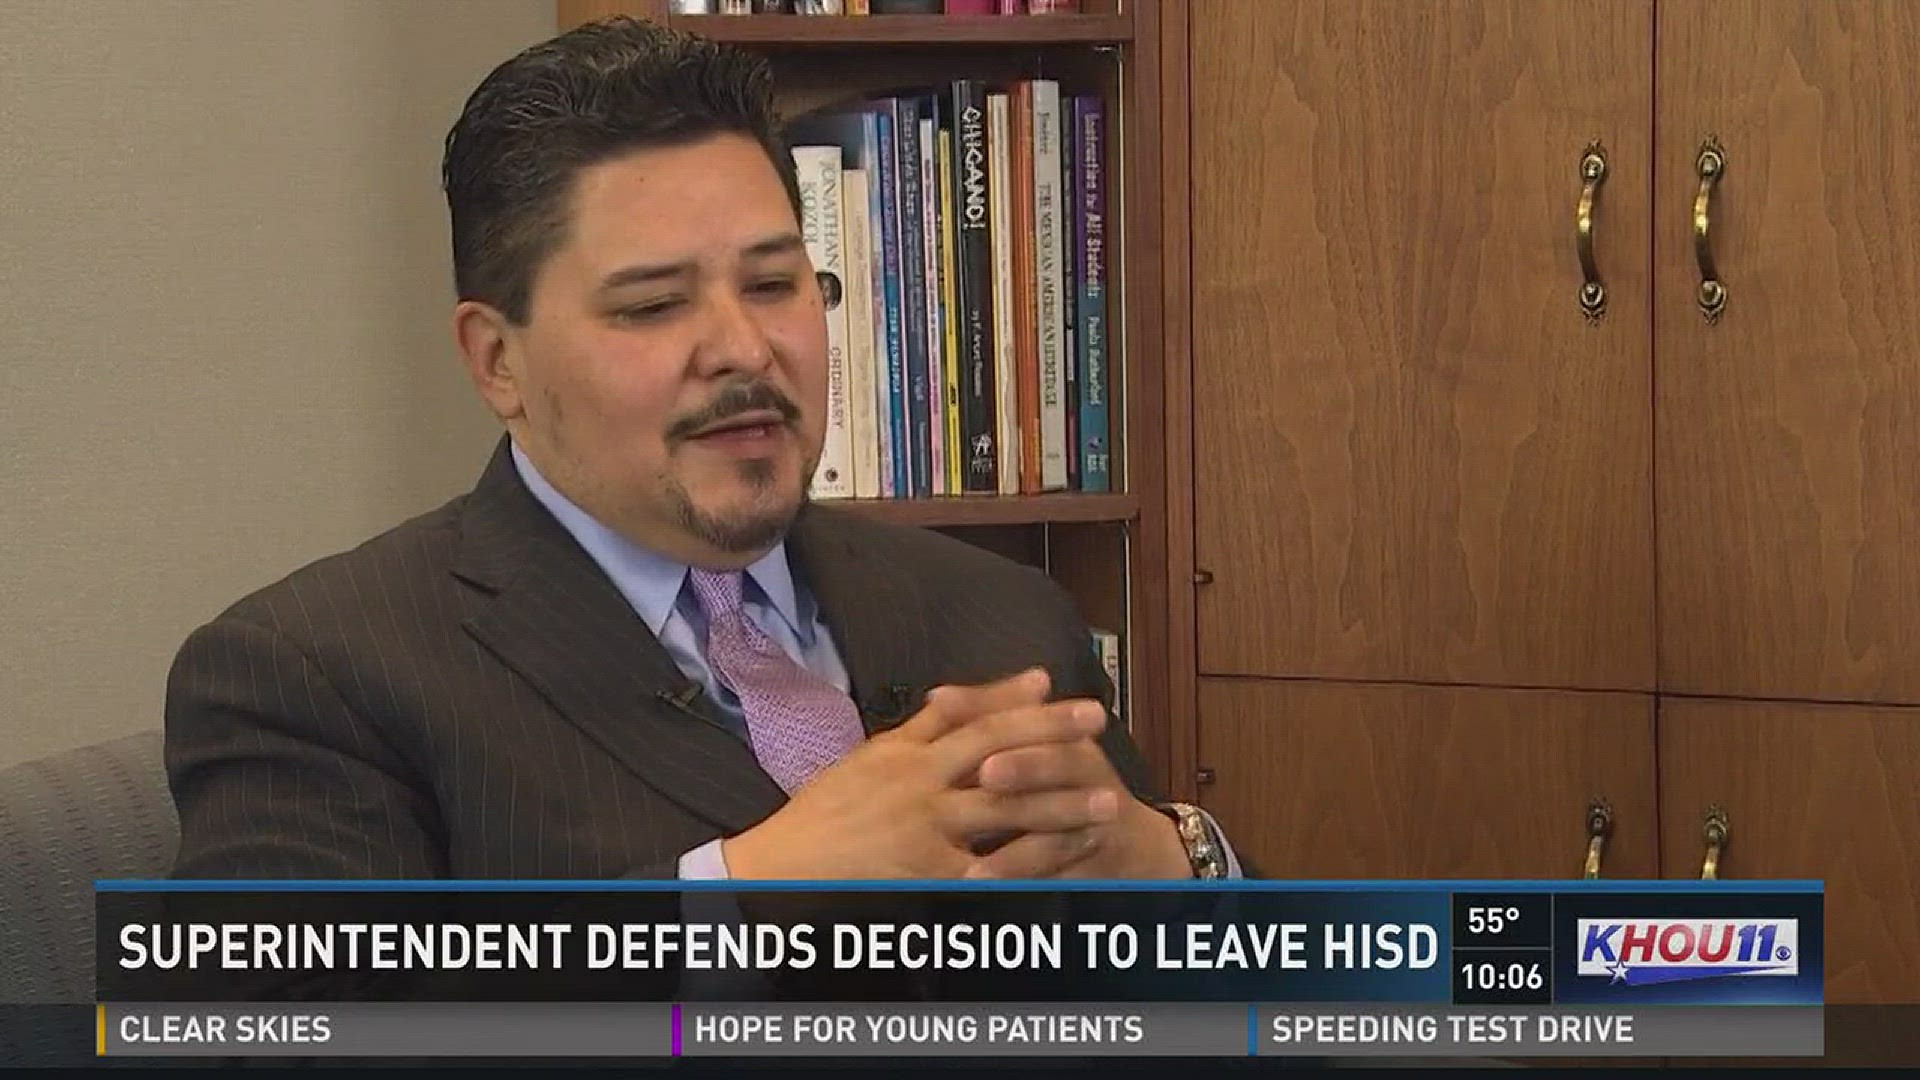 For the first time since announcing his resignation from HISD, soon-to-be former superintendent Richard Carranza spoke with KHOU 11 News about his reasons for packing up and heading to take over New York City Public Schools.